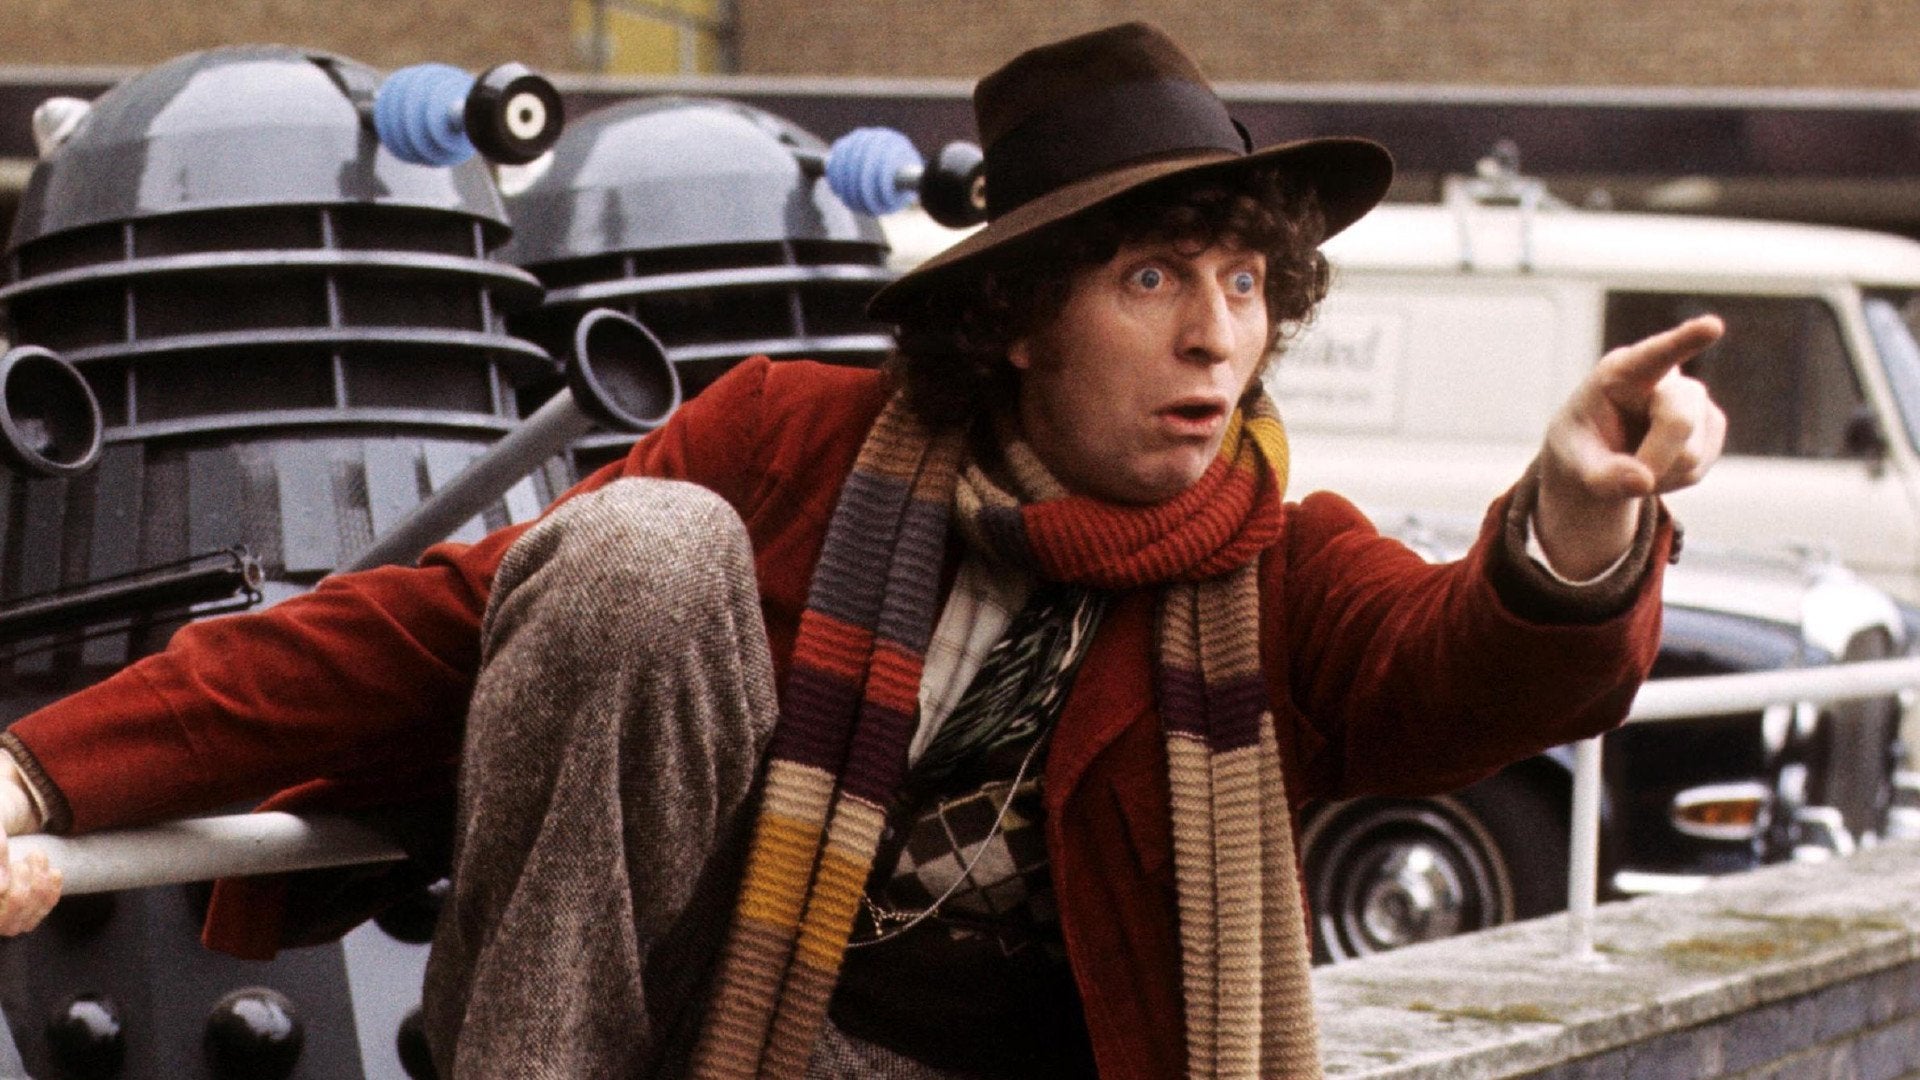 The 4th Doctor Baker (Doctor Who) [1920x1080]